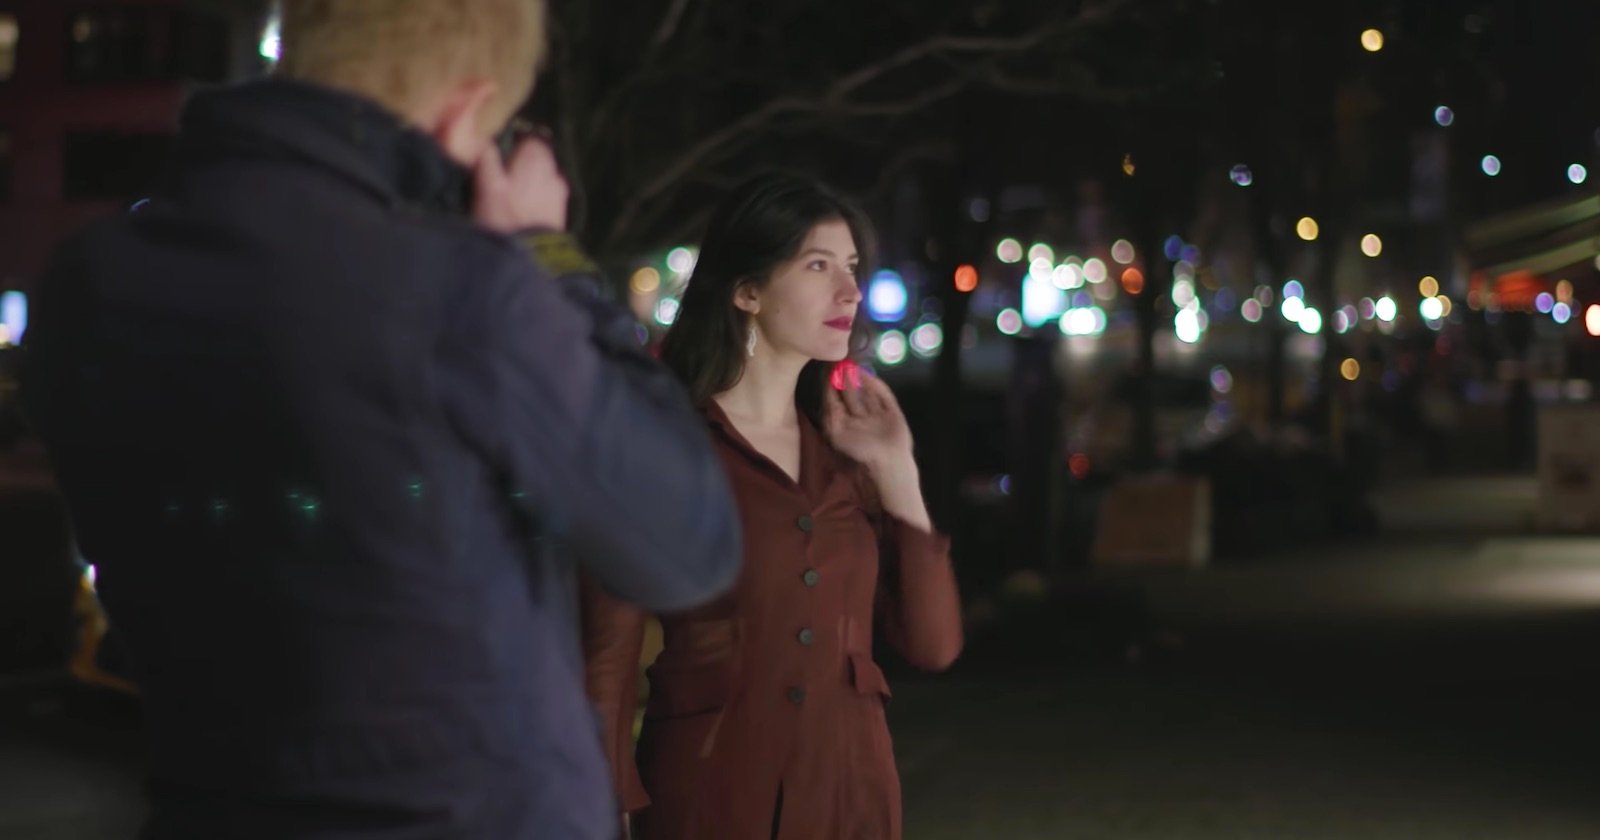 How to Take Awesome Night Portraits: 3 Photo Ideas in 3 Minutes